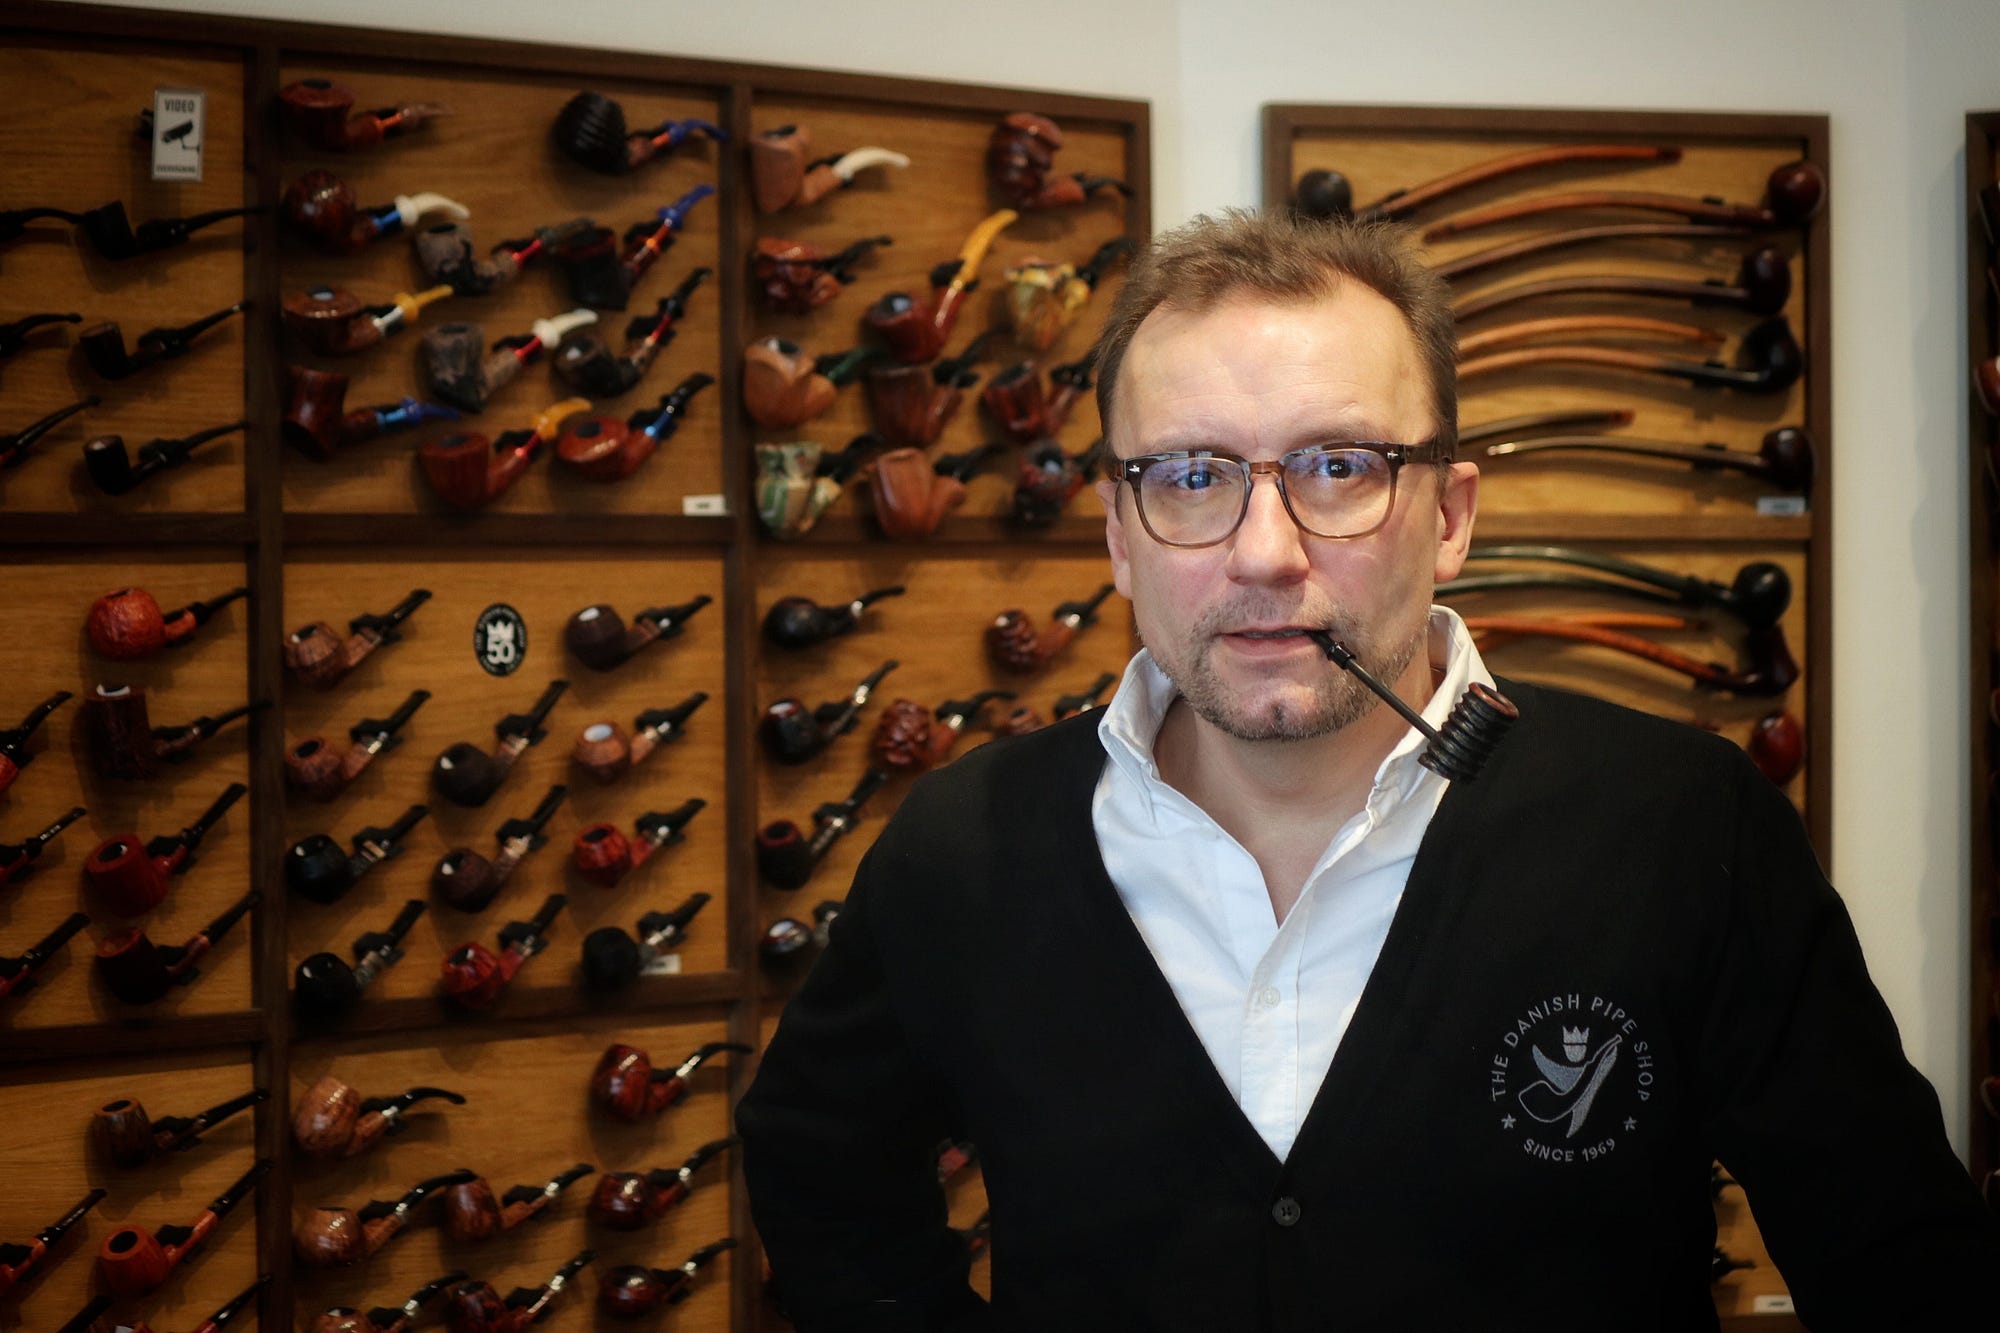 We don't do long-term plans” – Interview with the CEO of The Danish Pipe  Shop | by Bence Földi | Benyóblog | Medium